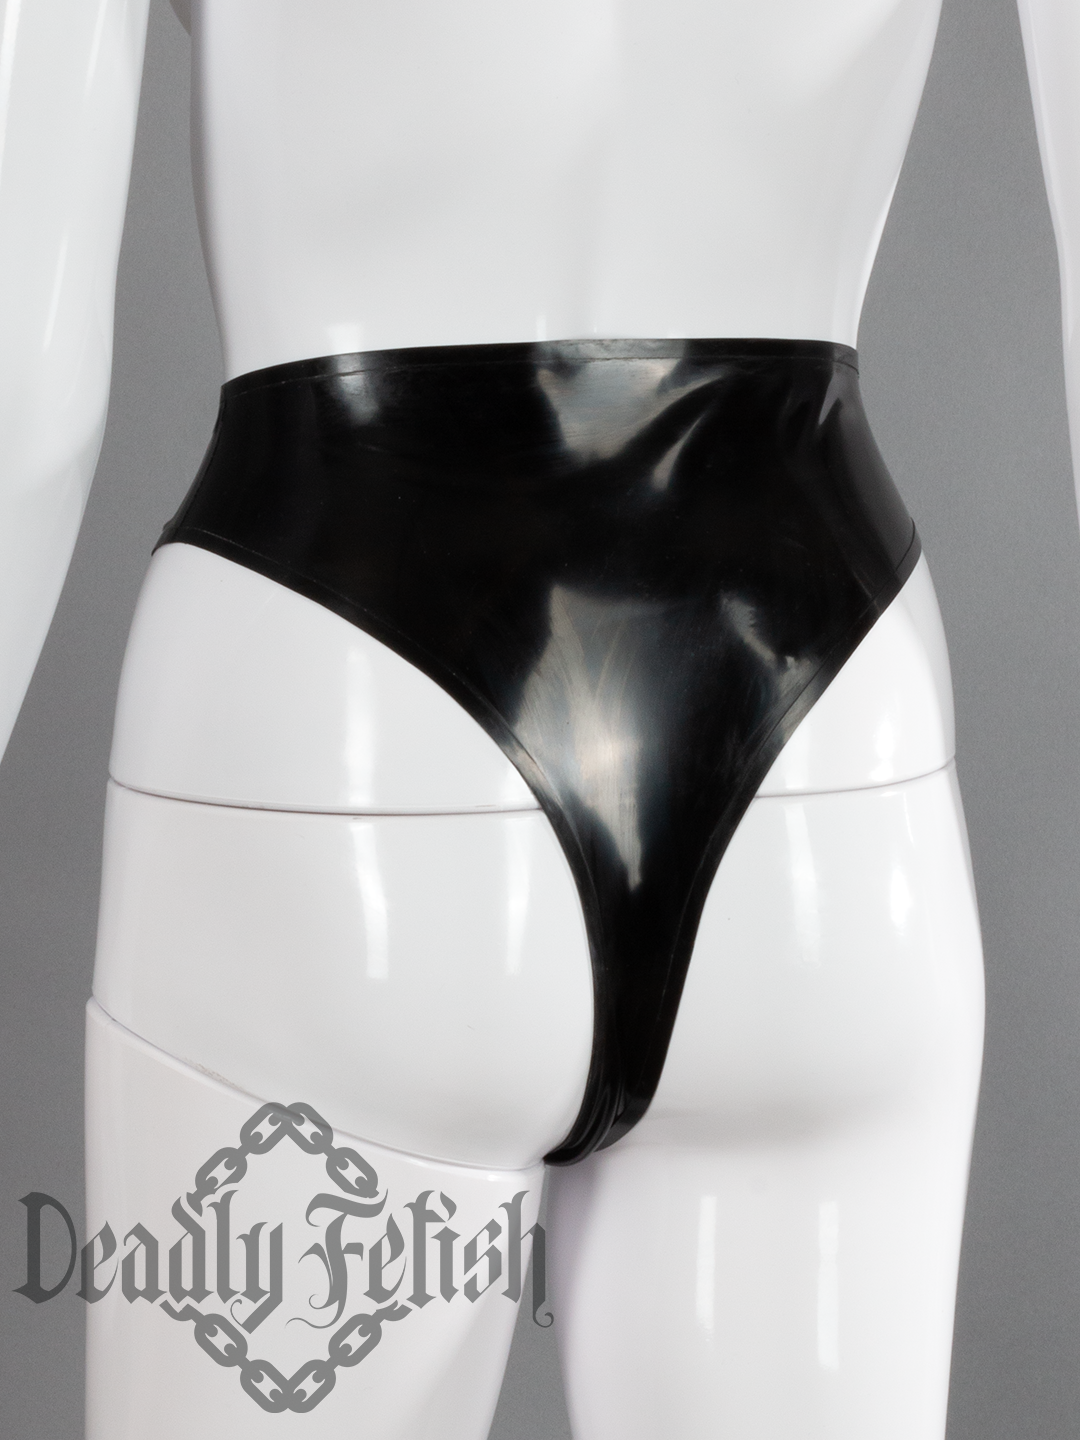 Deadly Fetish Made-To-Order Latex: Underwear #11